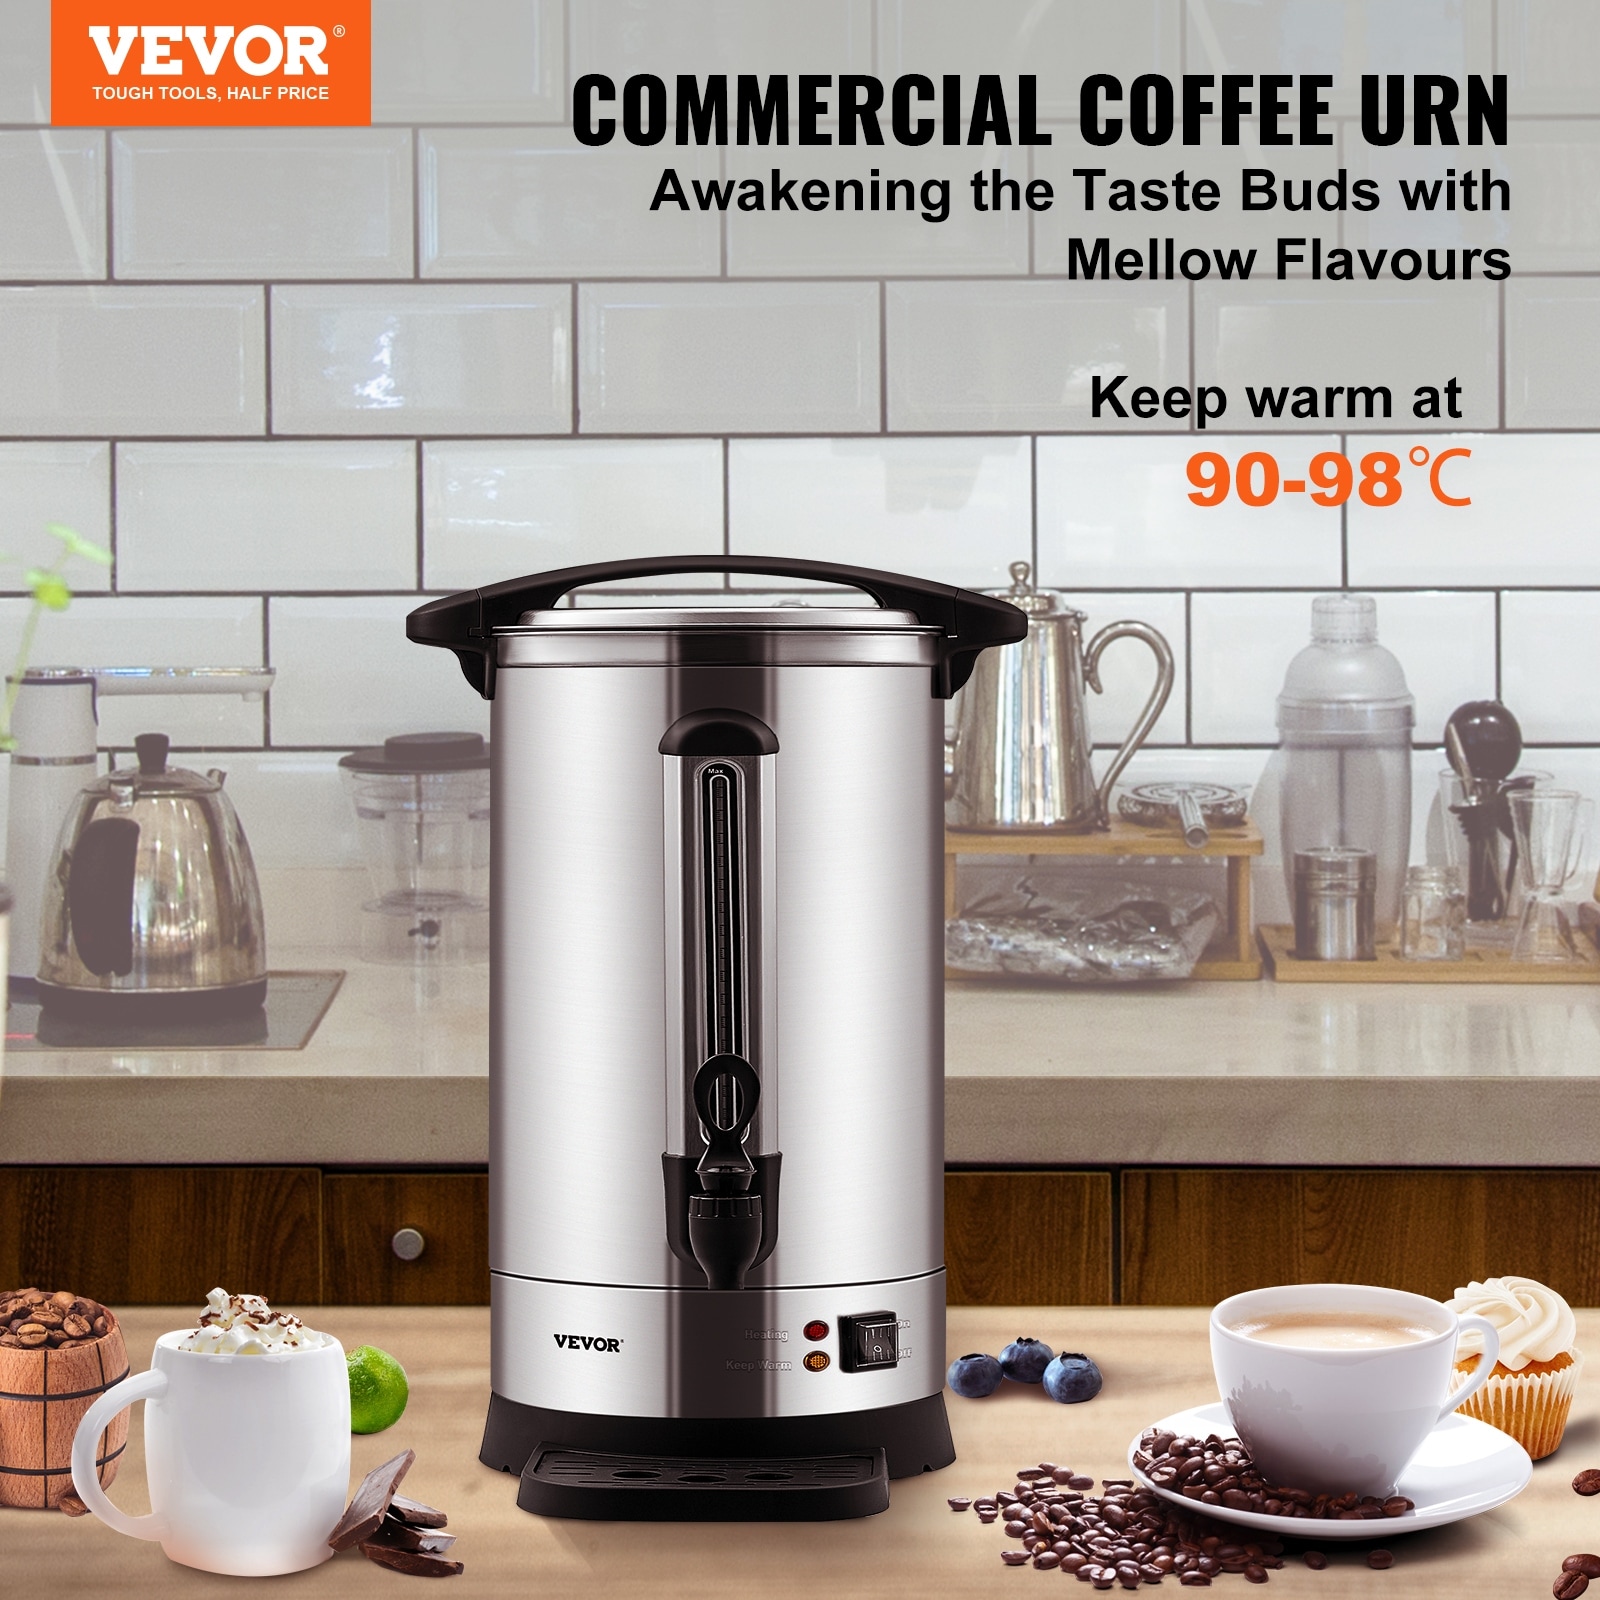 https://ak1.ostkcdn.com/images/products/is/images/direct/def46fd822e66a05a1e2debfbad1872daee963f3/VEVOR-Commercial-Coffee-Urn-65-110-Cup-Stainless-Steel-Coffee-Dispenser-Fast-Brew.jpg